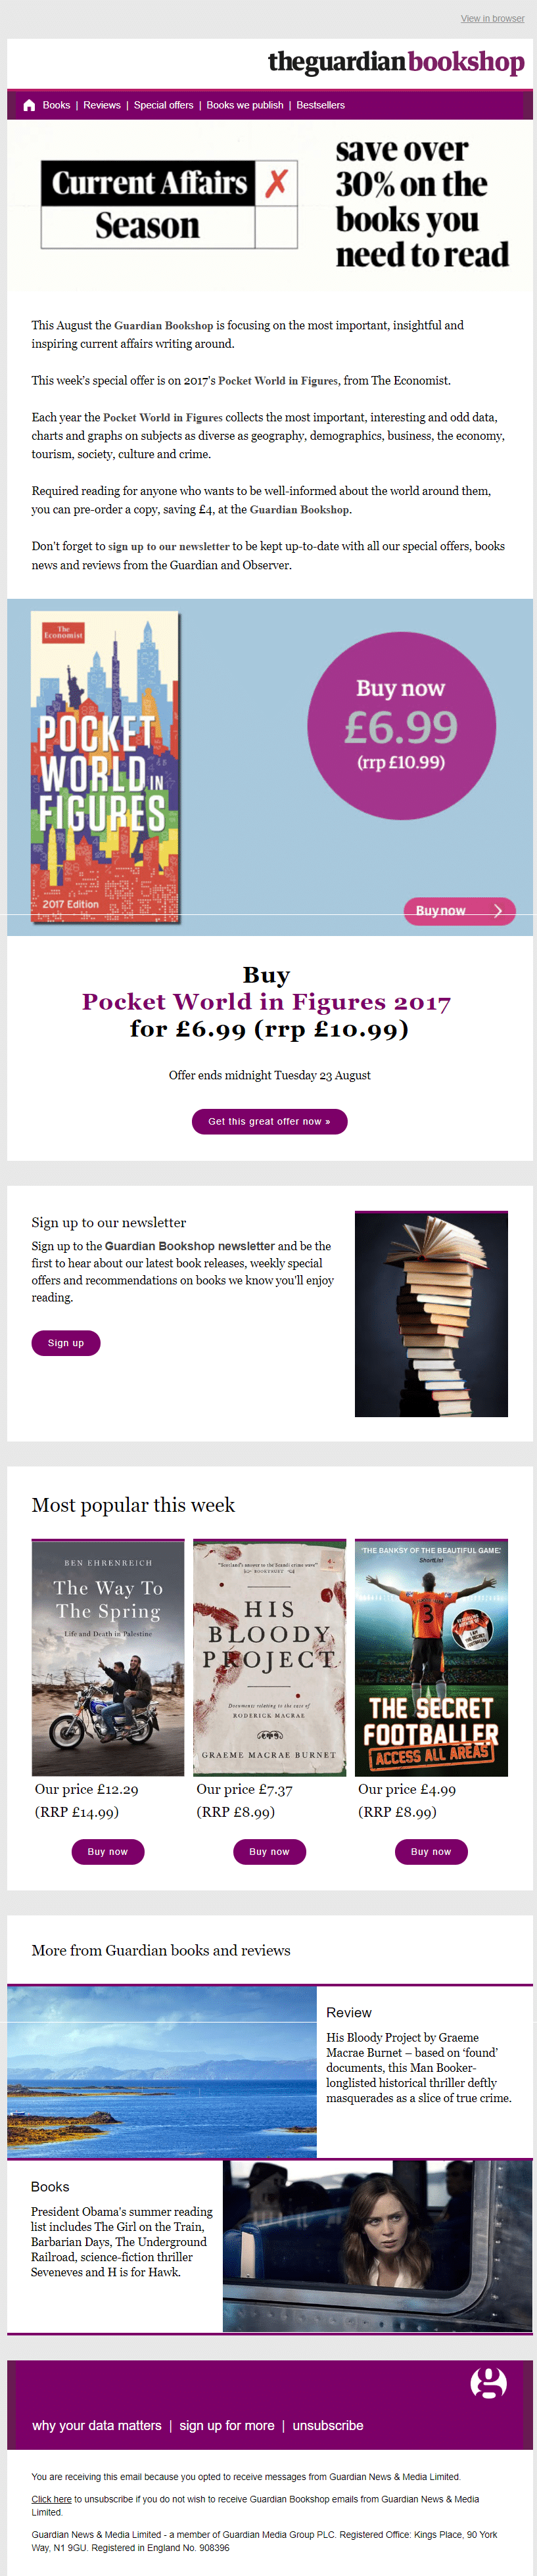 The Guardian monetized their email newsletter